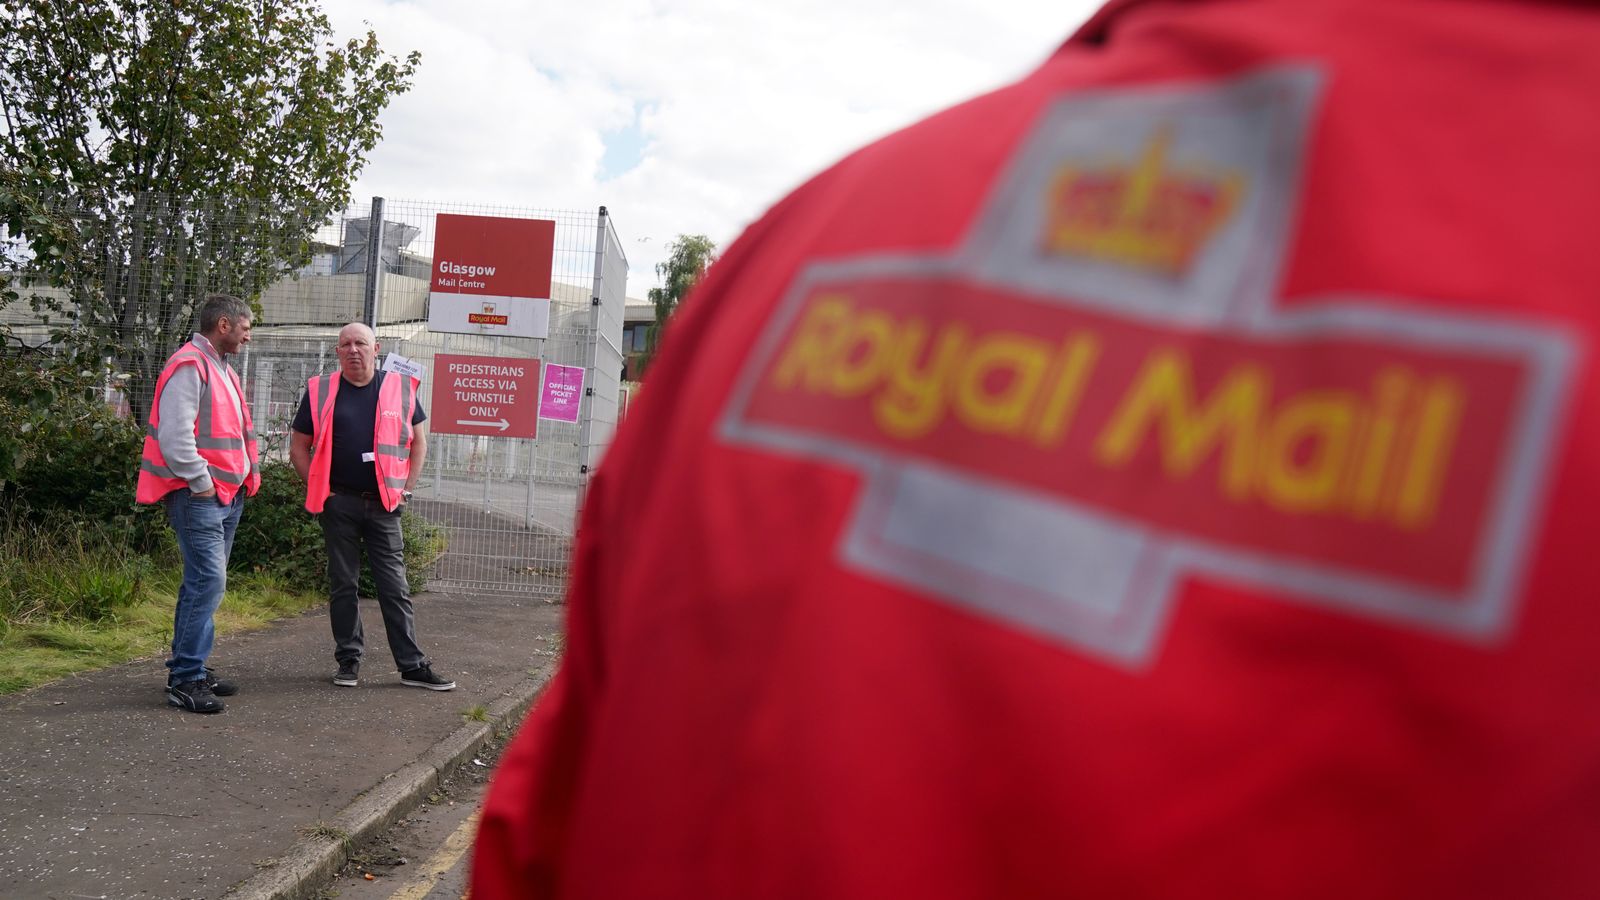 Royal Mail strikes: When are staff walking out and what's affected?